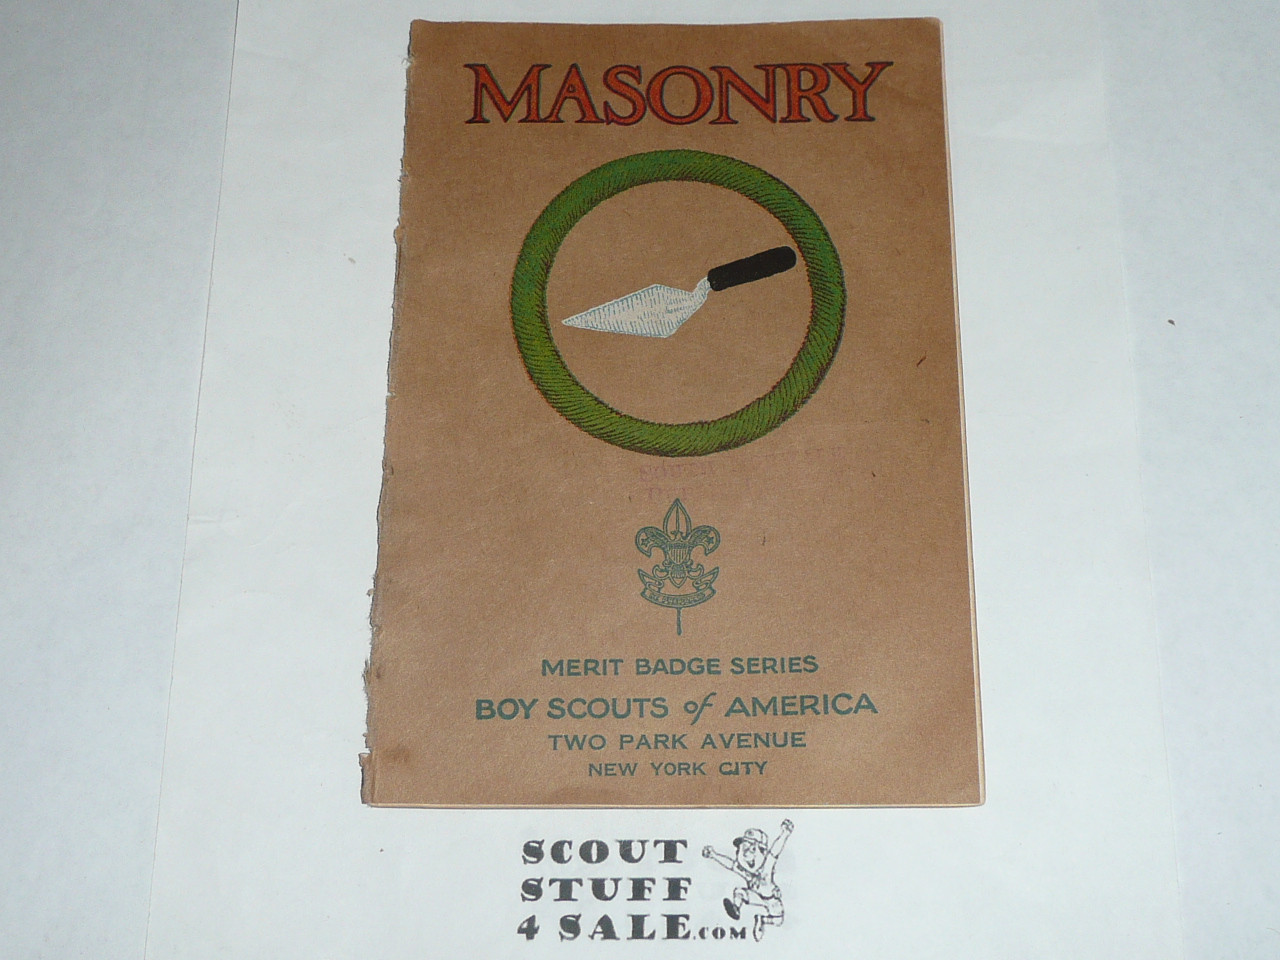 Masonry Merit Badge Pamphlet, Type 3, Tan Cover, 3-39 Printing, some spine wear